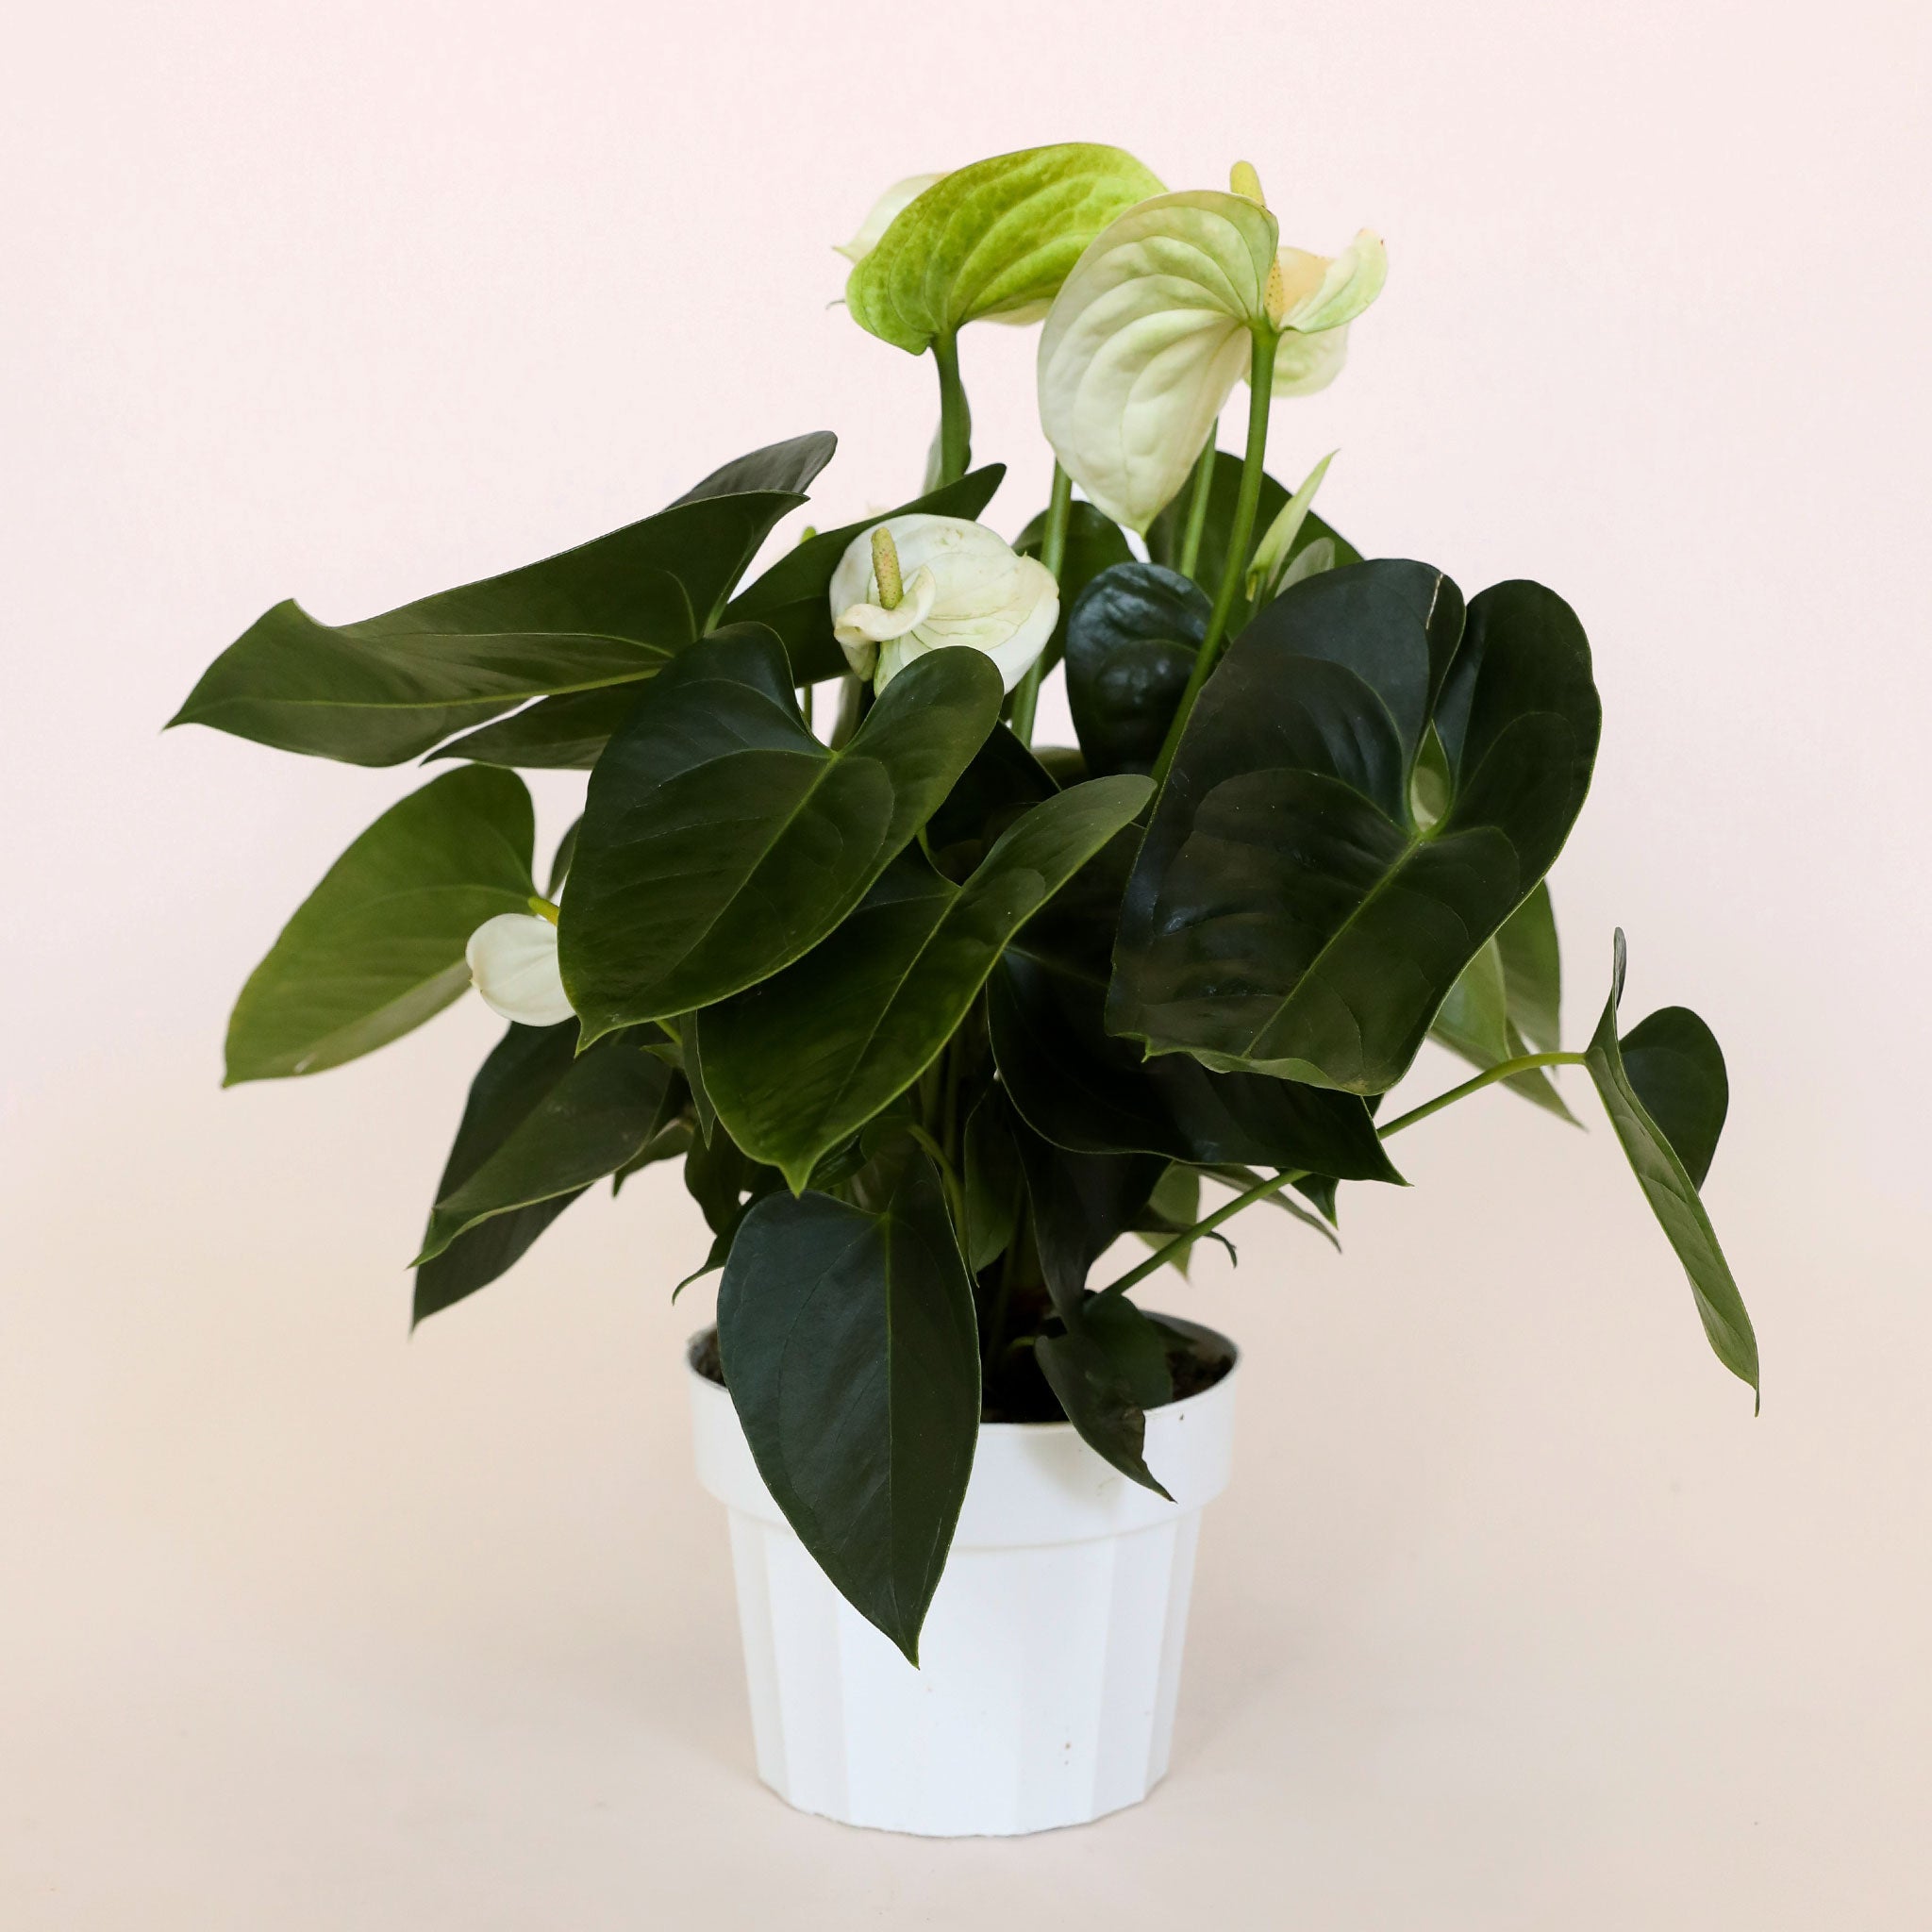 Anthurium White in a white pot. Anthurium has dark spade shaped leaves and tall flat white petal flowers and white-green stamen.